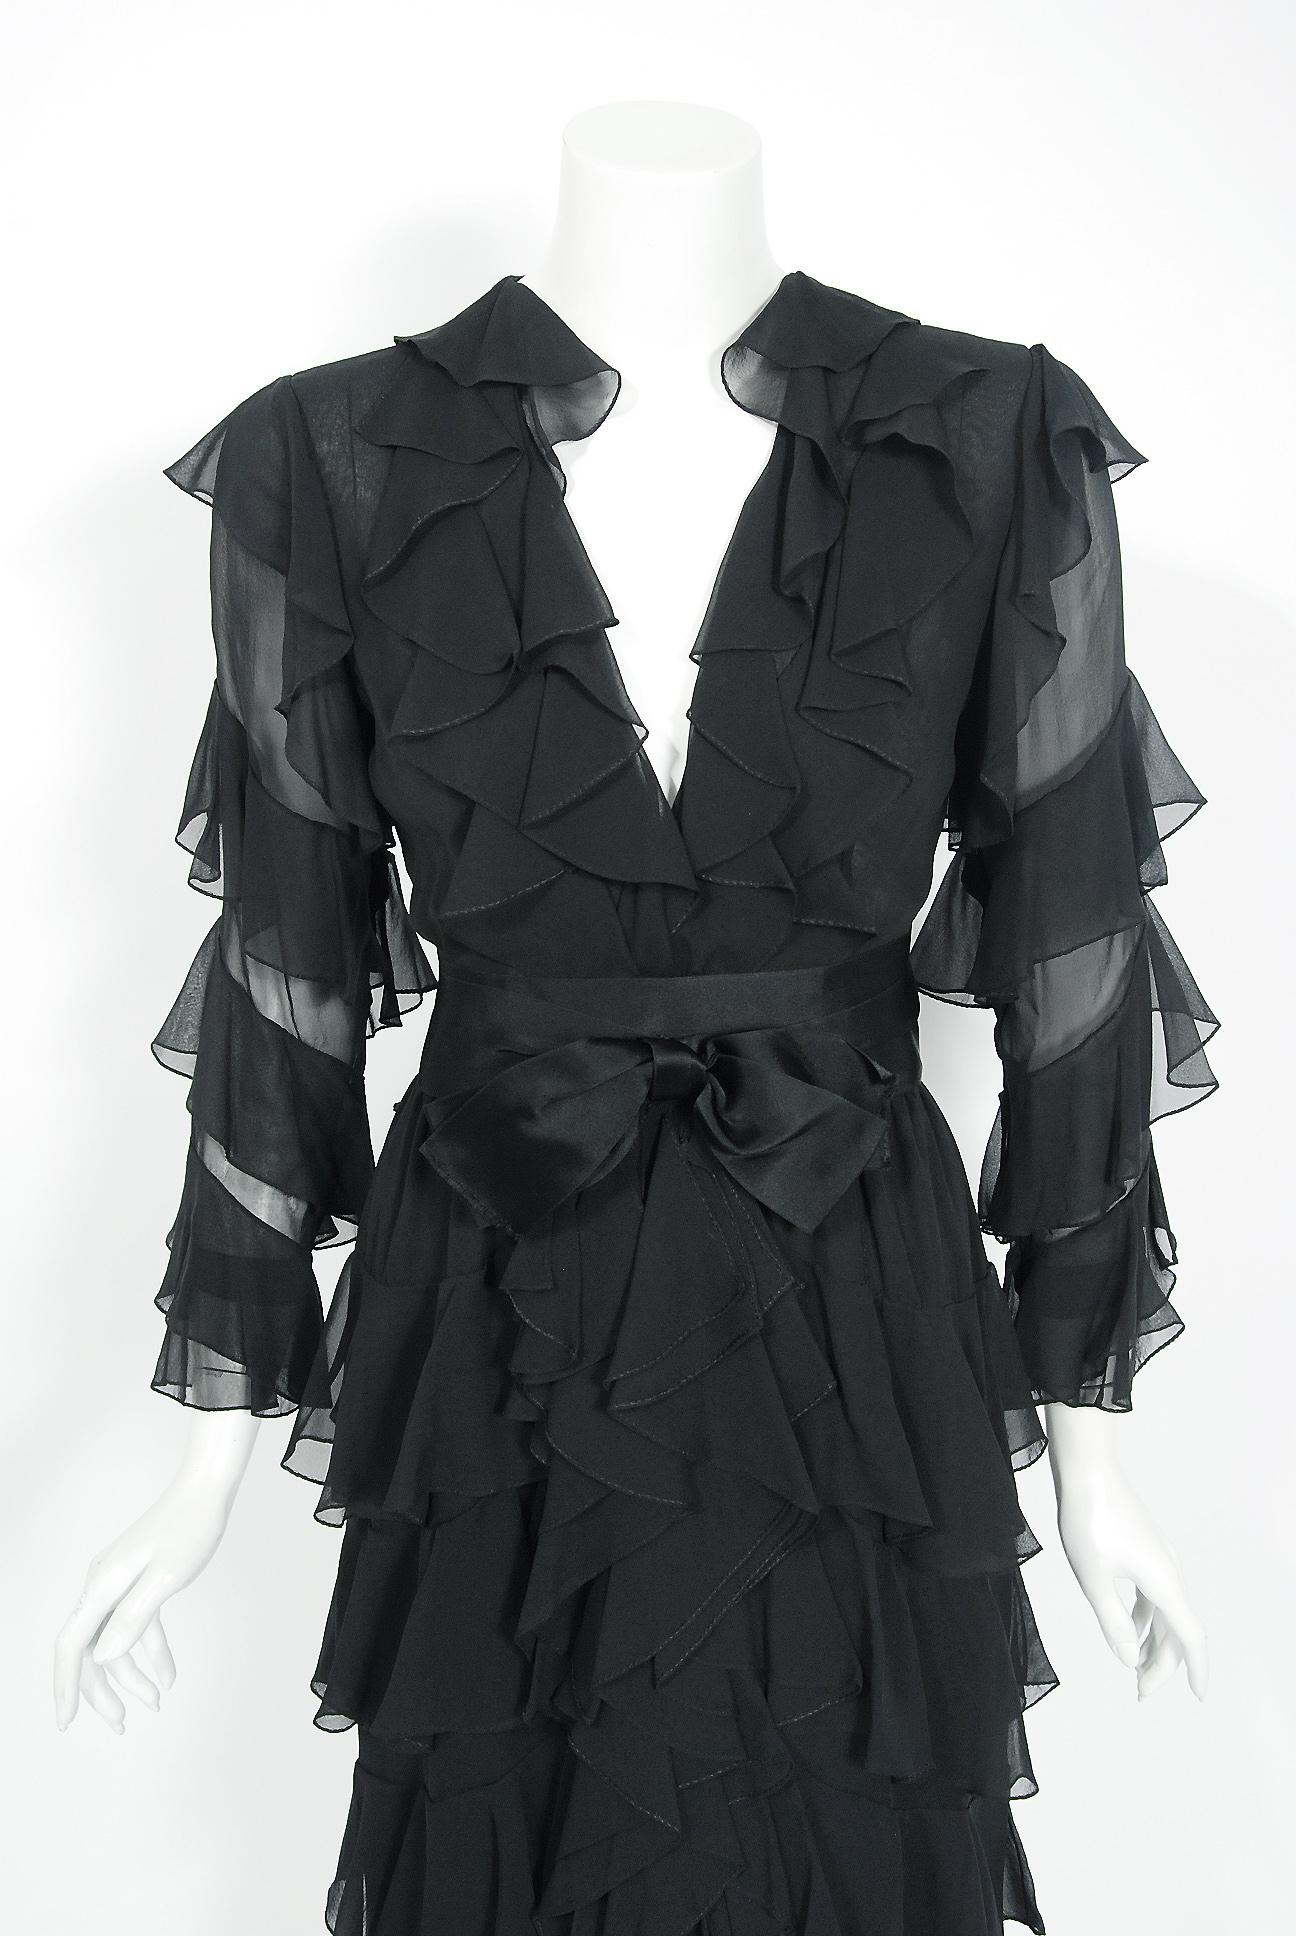 Gorgeous Bill Blass Couture black semi-sheer silk chiffon cocktail dating back to his 1973 collection. Building upon the innovations of European designers such as Coco Chanel, Blass made clothes that allowed women a modern sense of ease. He made